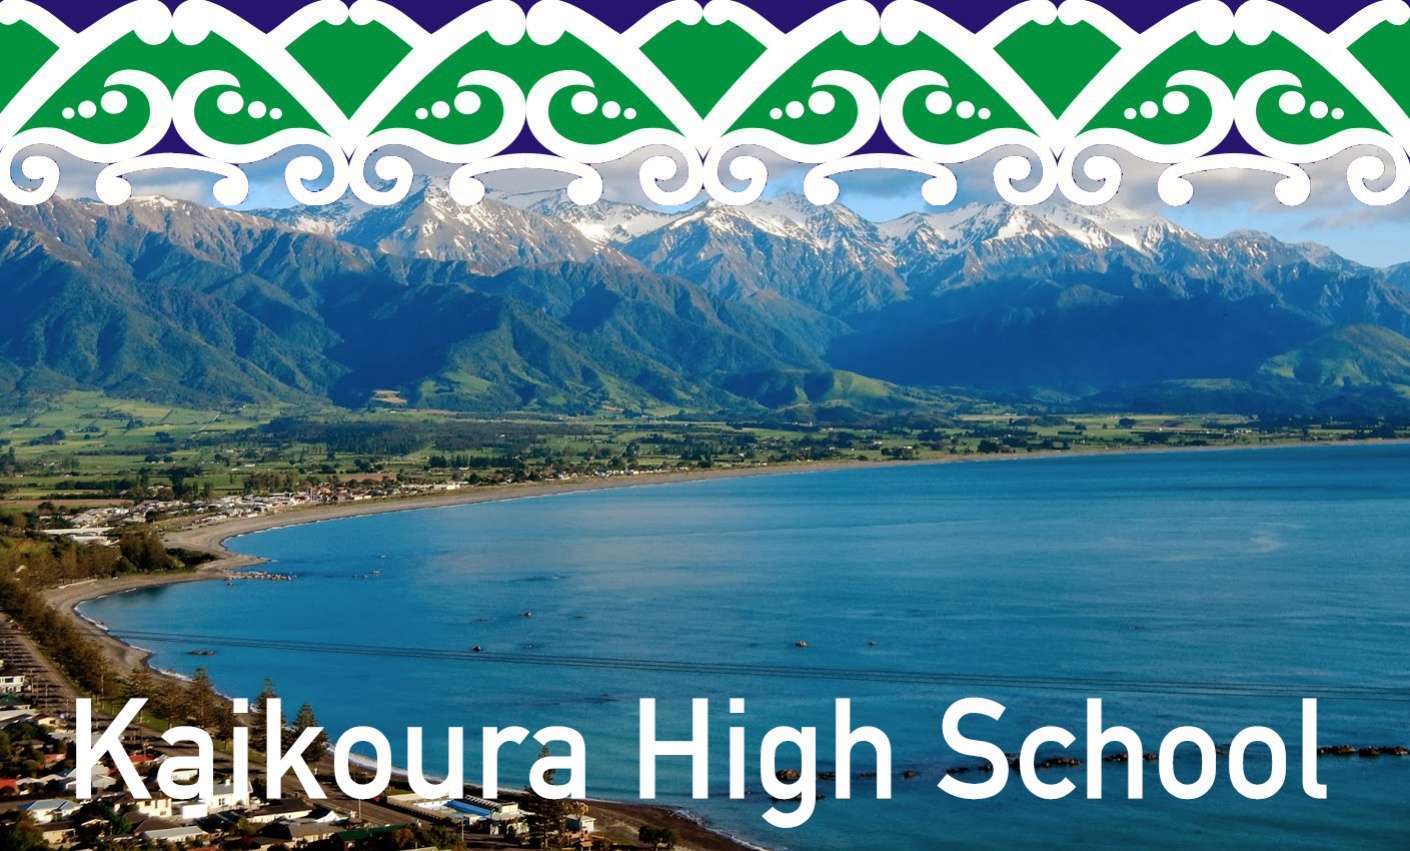 Kaikoura High School Chooses Inbox Design For Website Redesign Project image